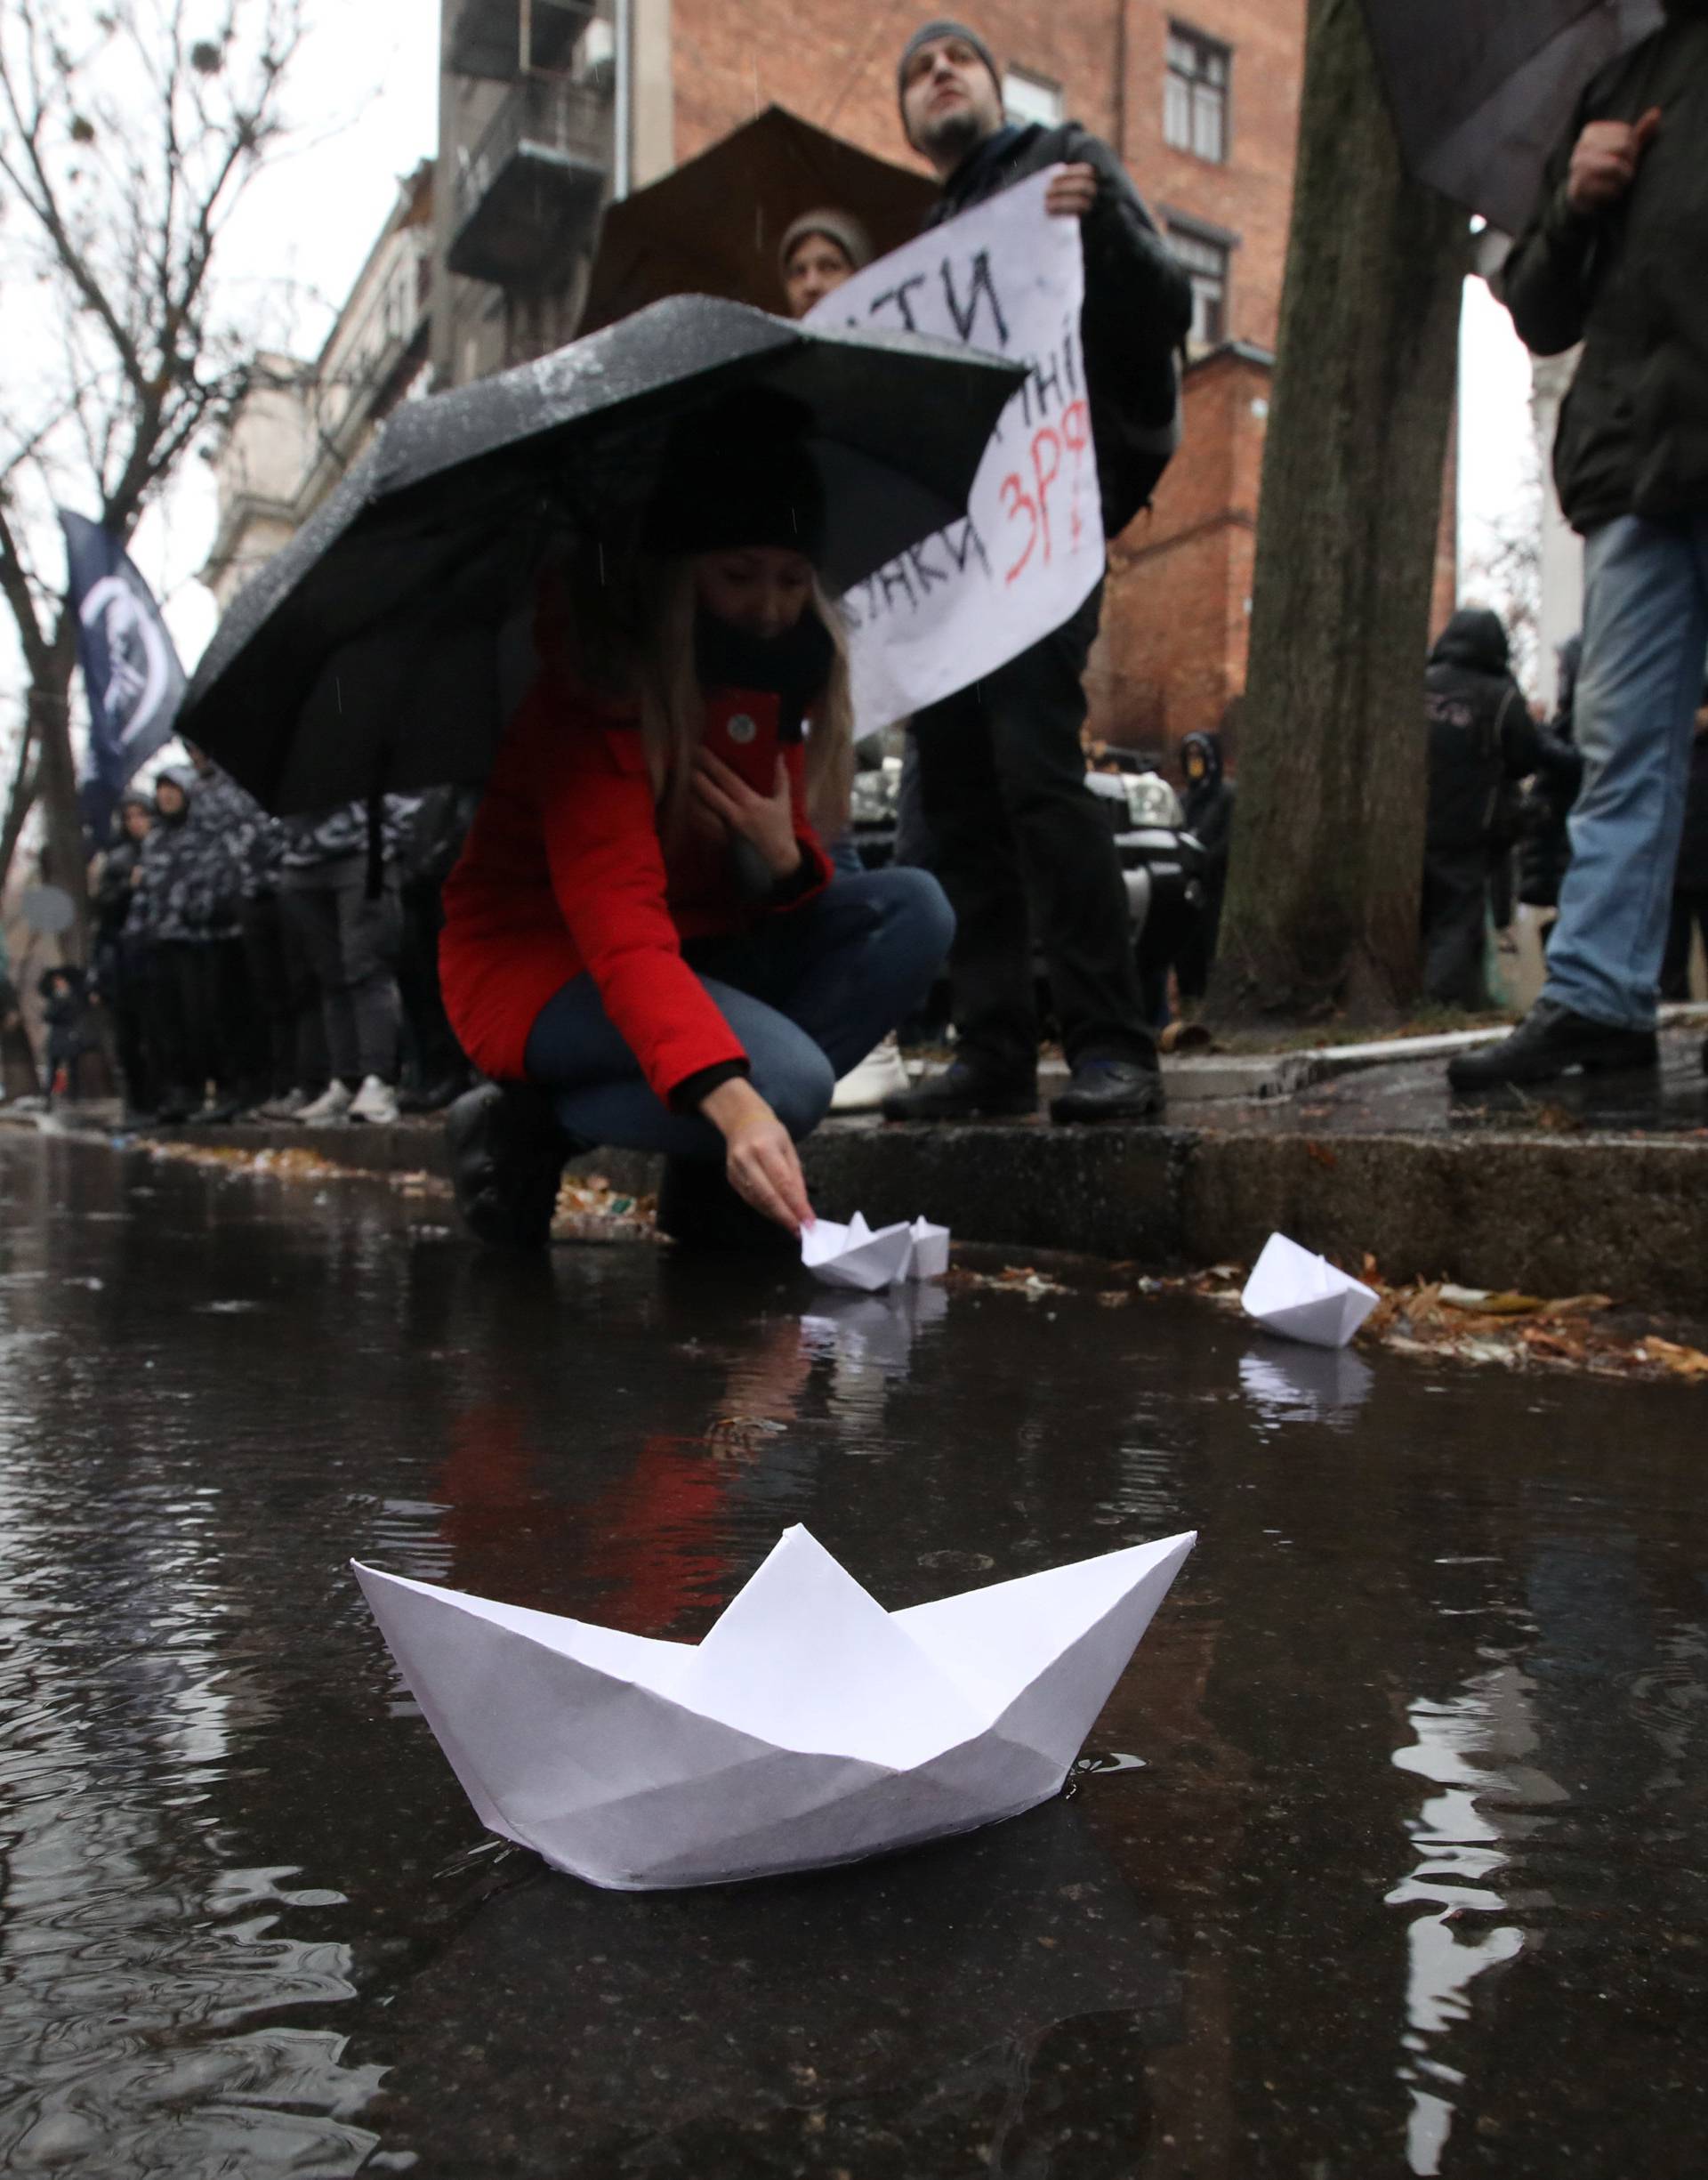 A demonstrator launches a paper boat during a rally to support the Ukrainian navy in front of the Russia Consulate in Kharkiv